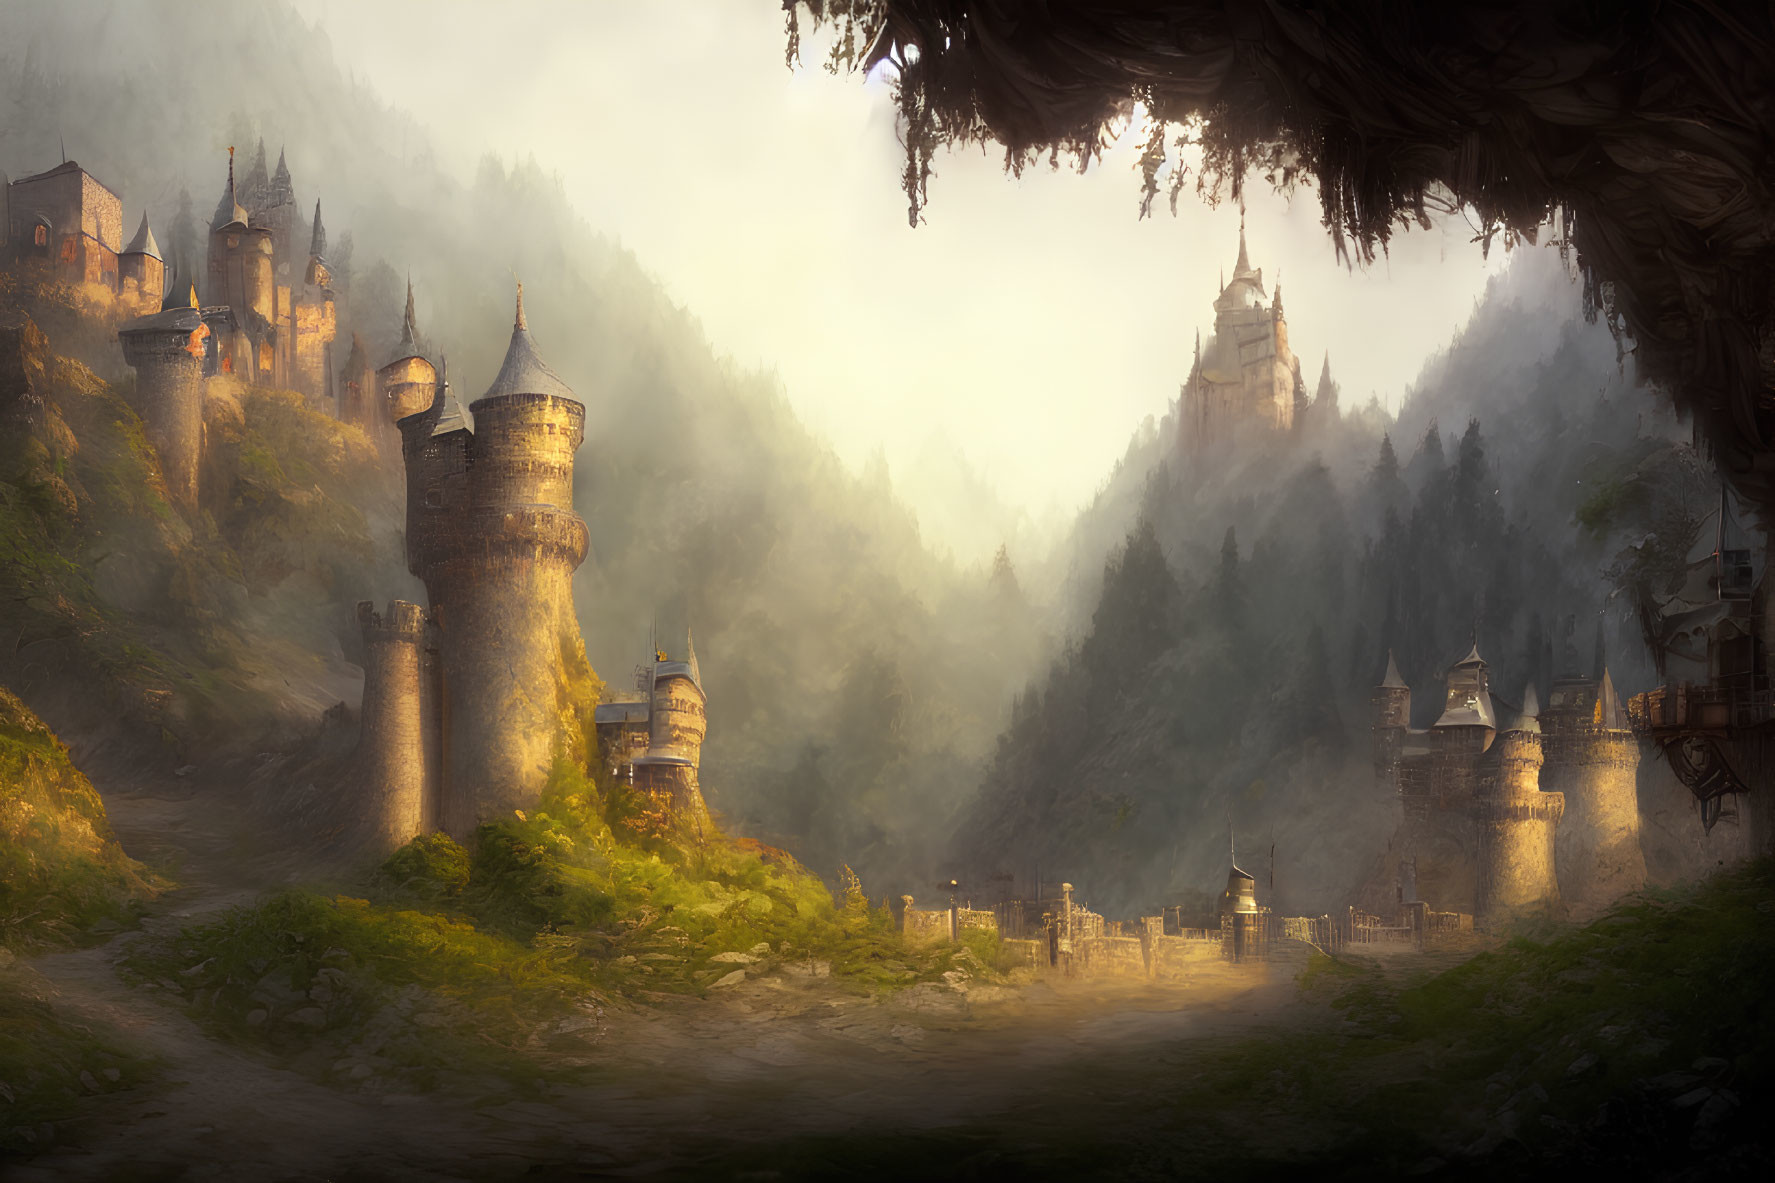 Mystical fantasy landscape with castle, hills, and misty sunlight.